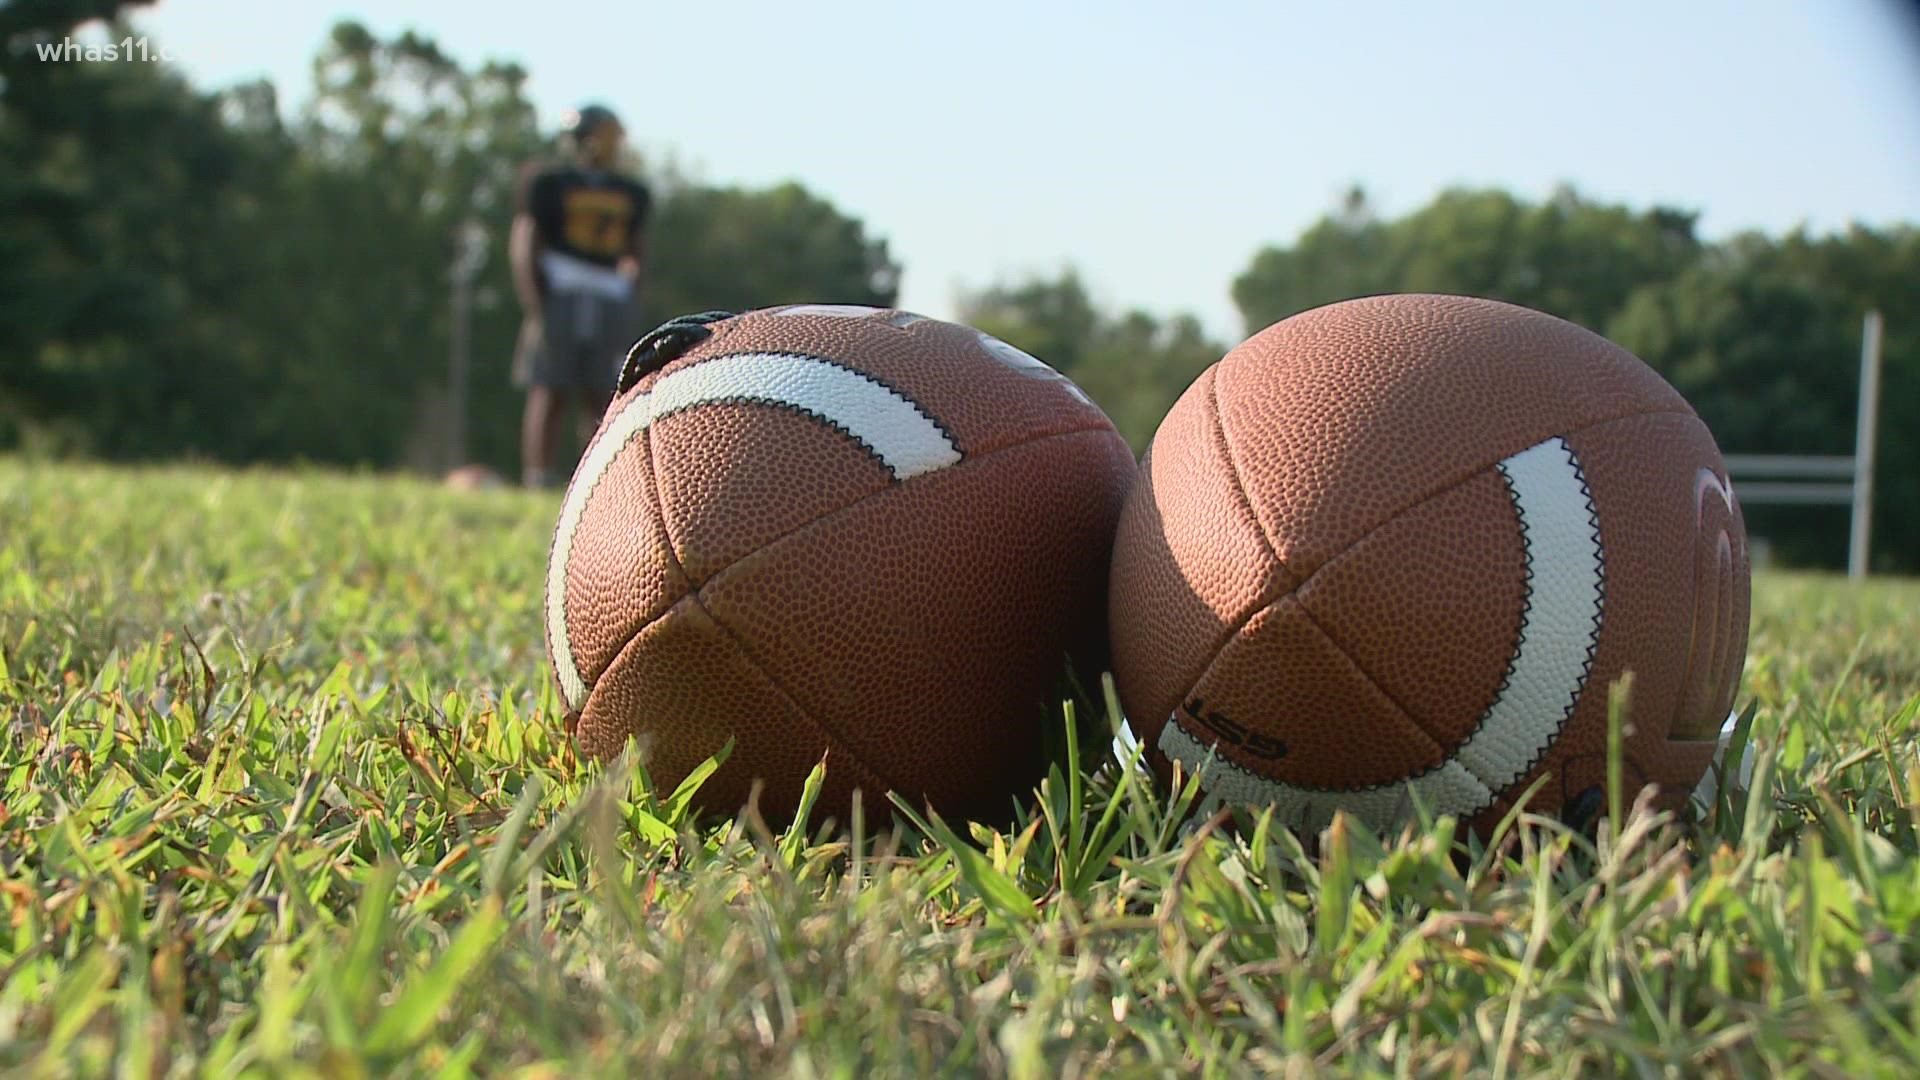 The Kammerer Middle team says they are looking forward to the season after COVID-19 canceled plans last year.